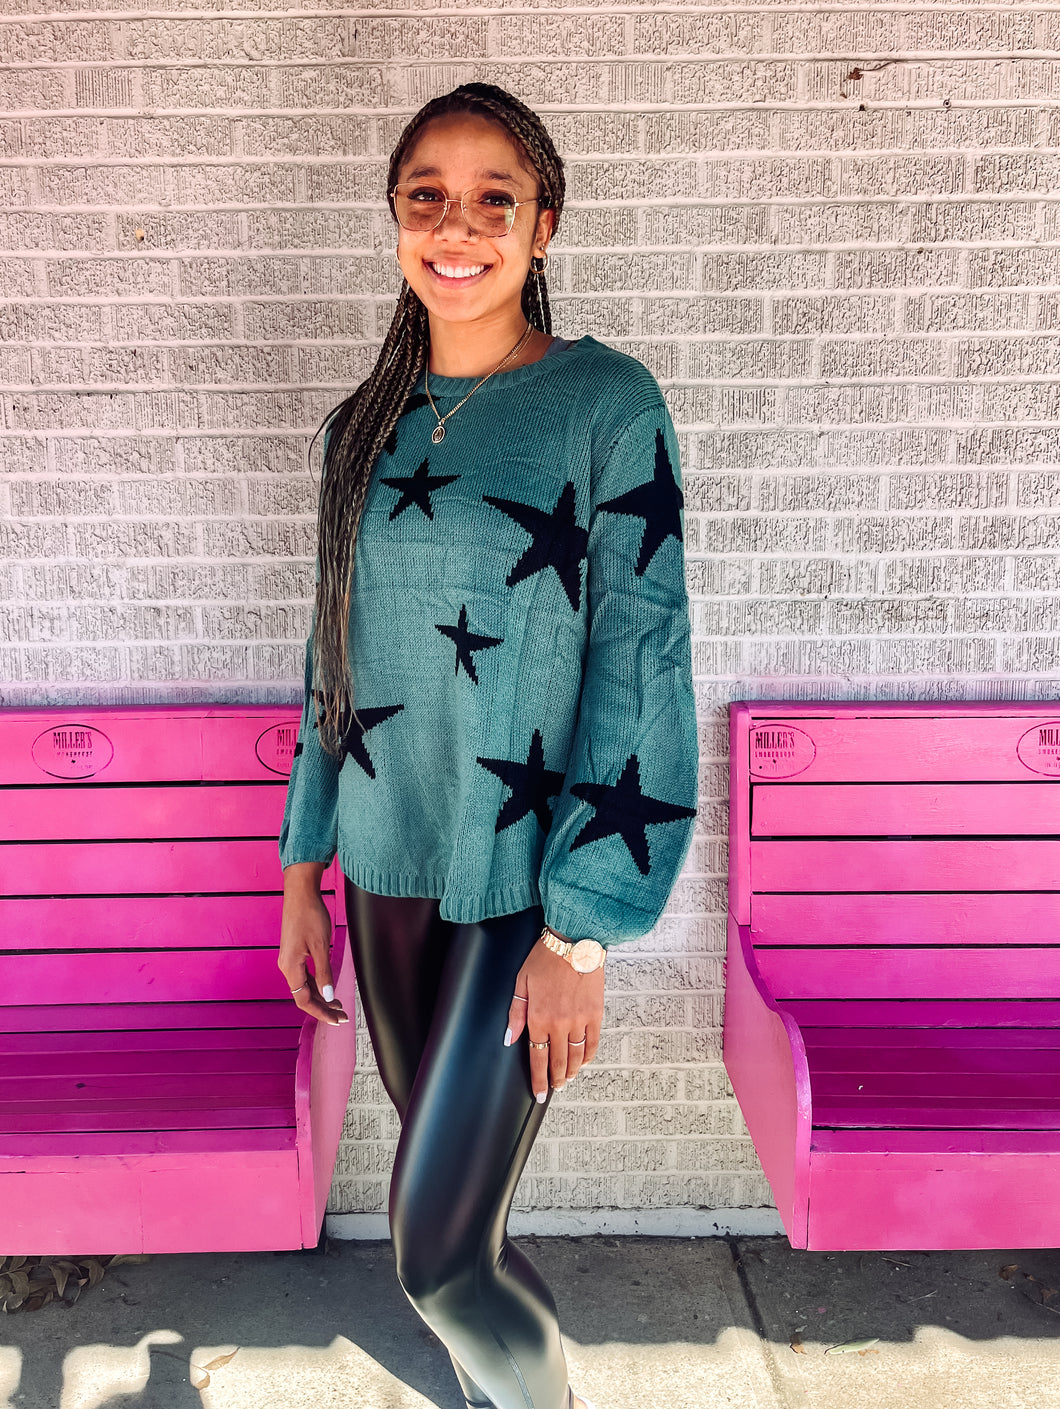 Turquoise Star sweater